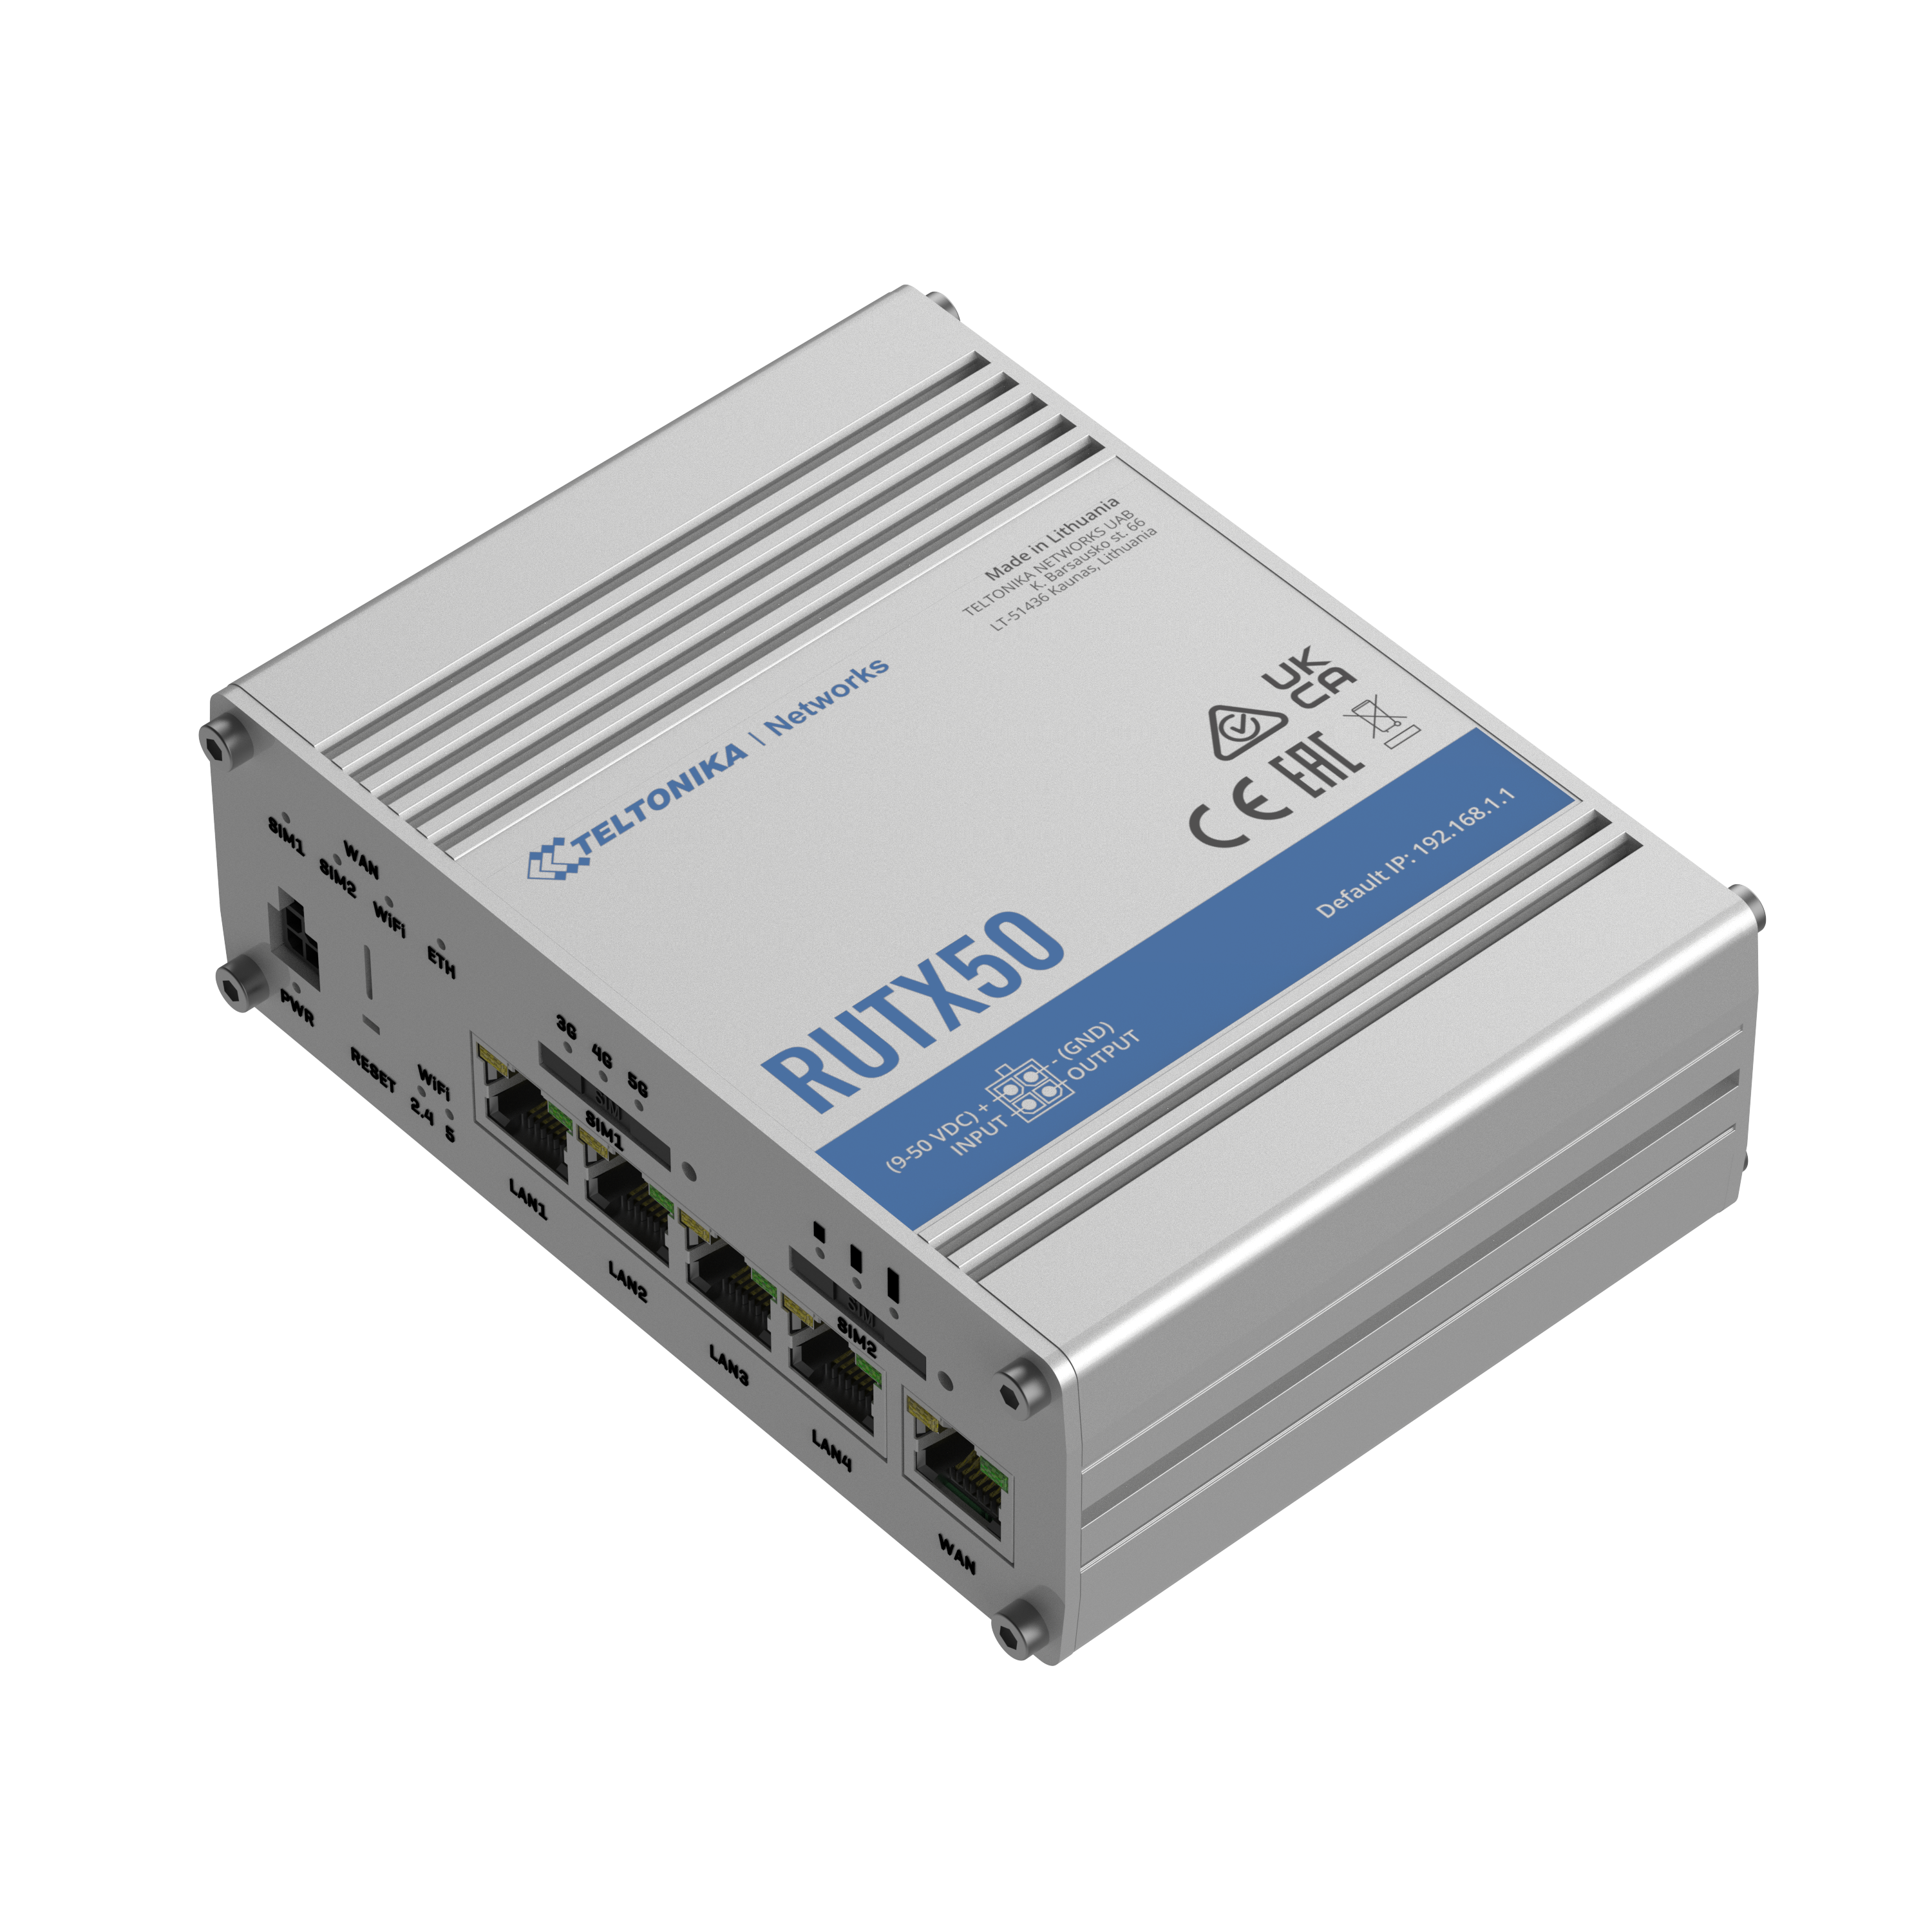 RUTX50 - Industrial Cellular Router. 5G, 4G (LTE CAT 20) and 3G